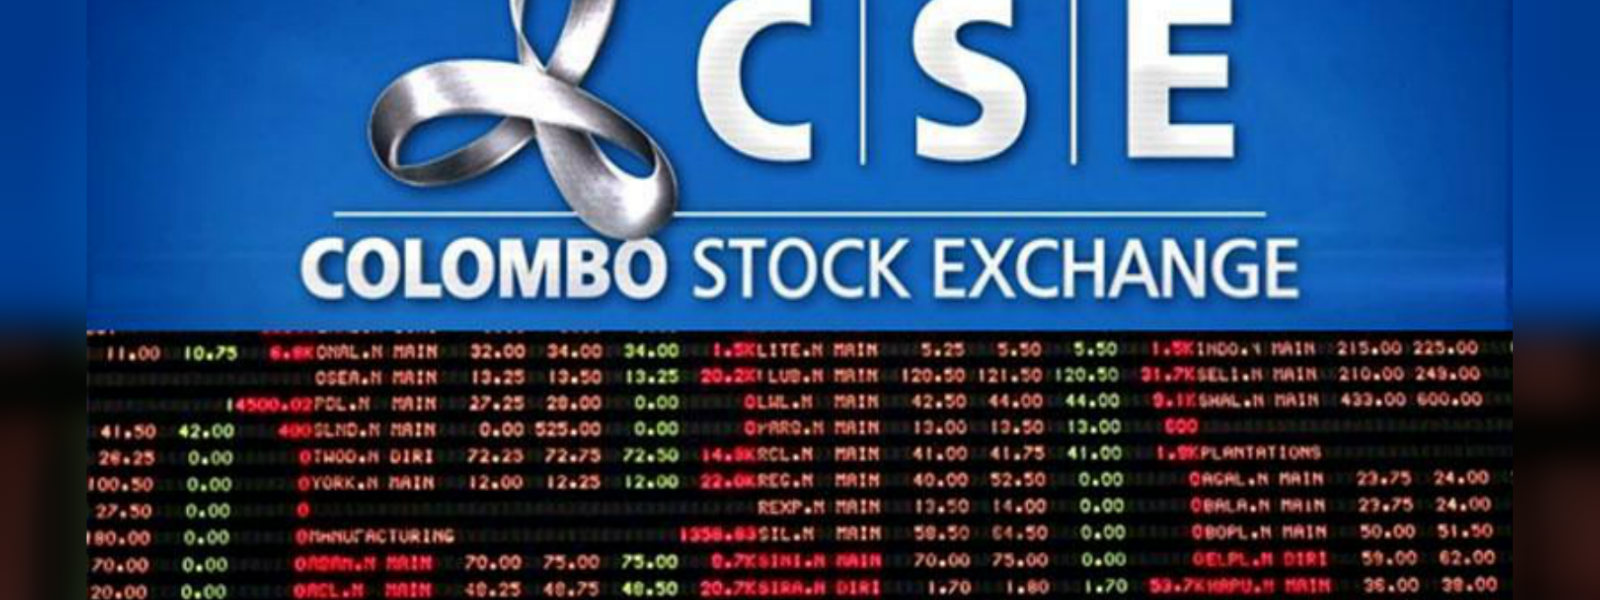 Colombo Stock Exchange looking bright